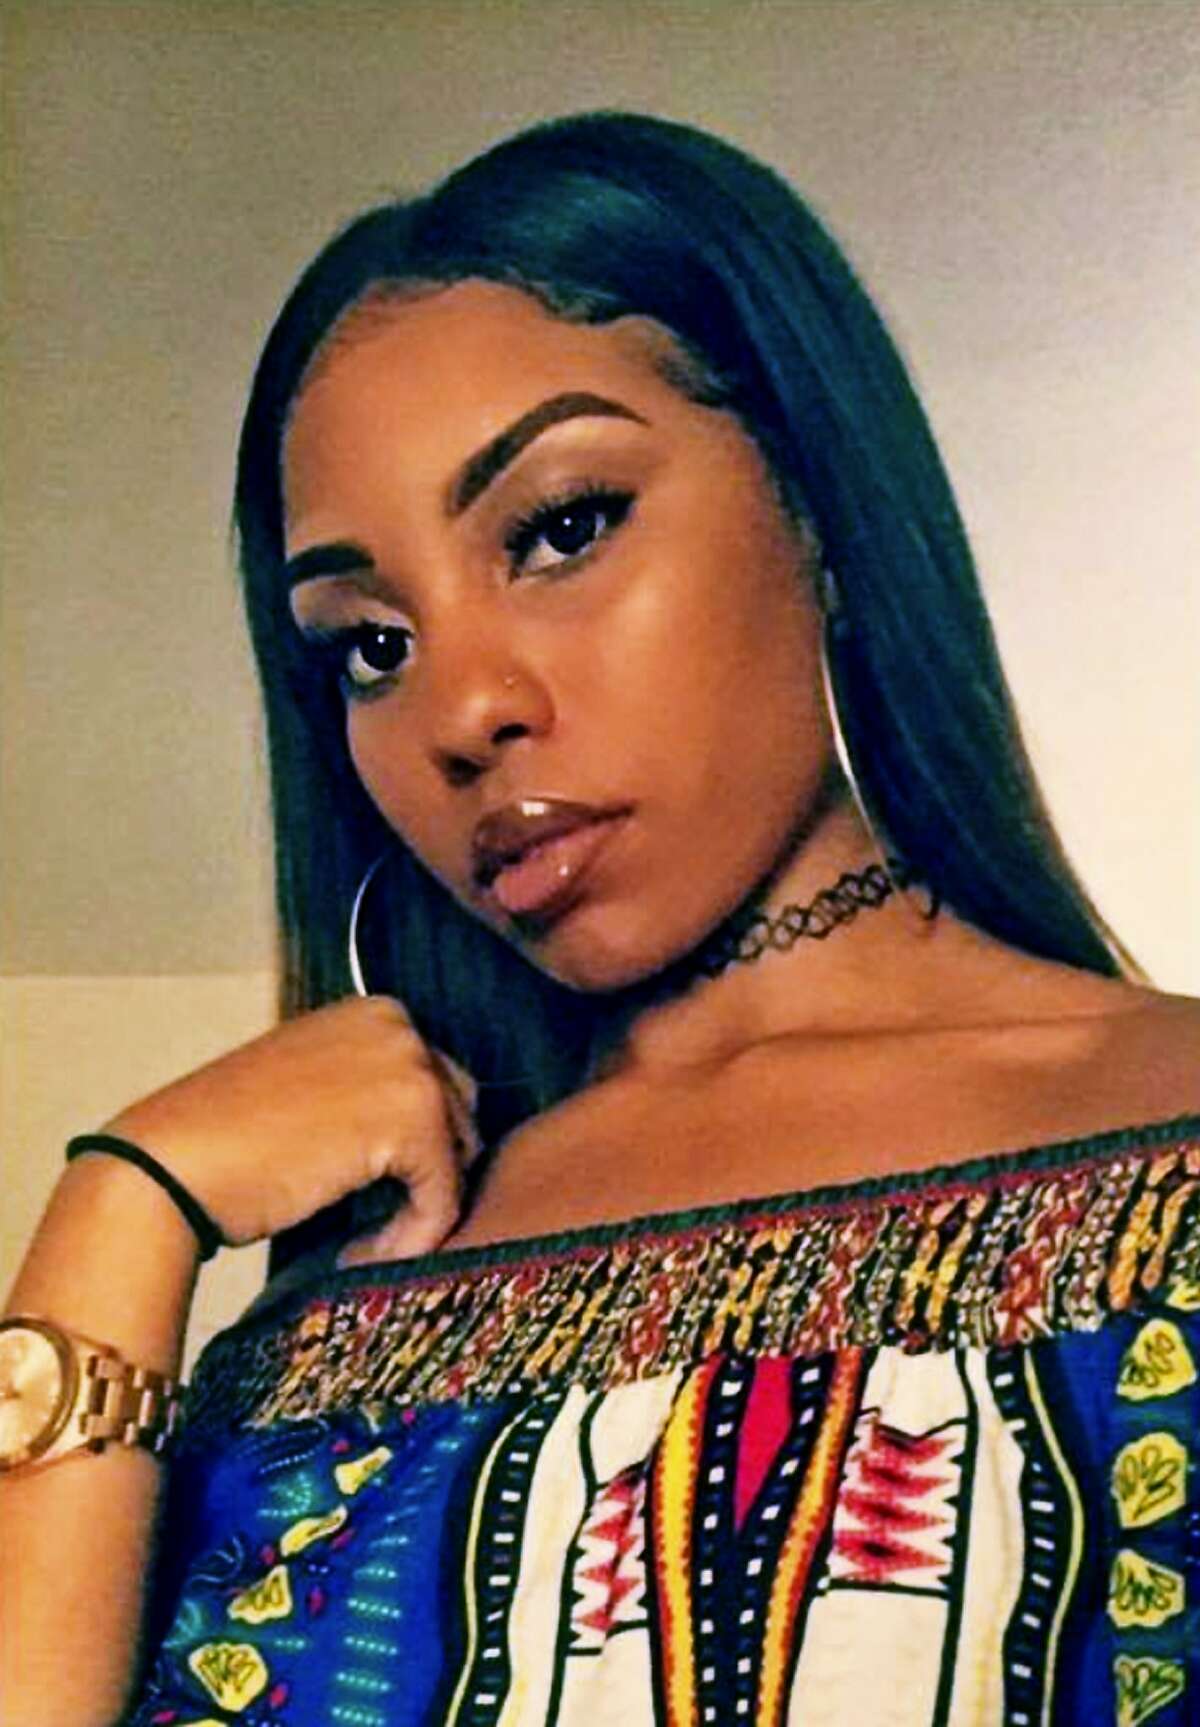 This July 3, 2017, photo provided by Ebony Monroe shows her cousin Nia Wilson in a selfie, who was killed in an unprovoked stabbing attack at a Bay Area Rapid Transit station in Oakland on July 22, 2018. John Cowell, 27, a recently paroled robber with a violent history, was peacefully arrested on an Antioch-bound train Monday night about 12 miles (19 kilometers) from the Oakland station where investigators believe he killed Wilson and wounded her sister Sunday night.